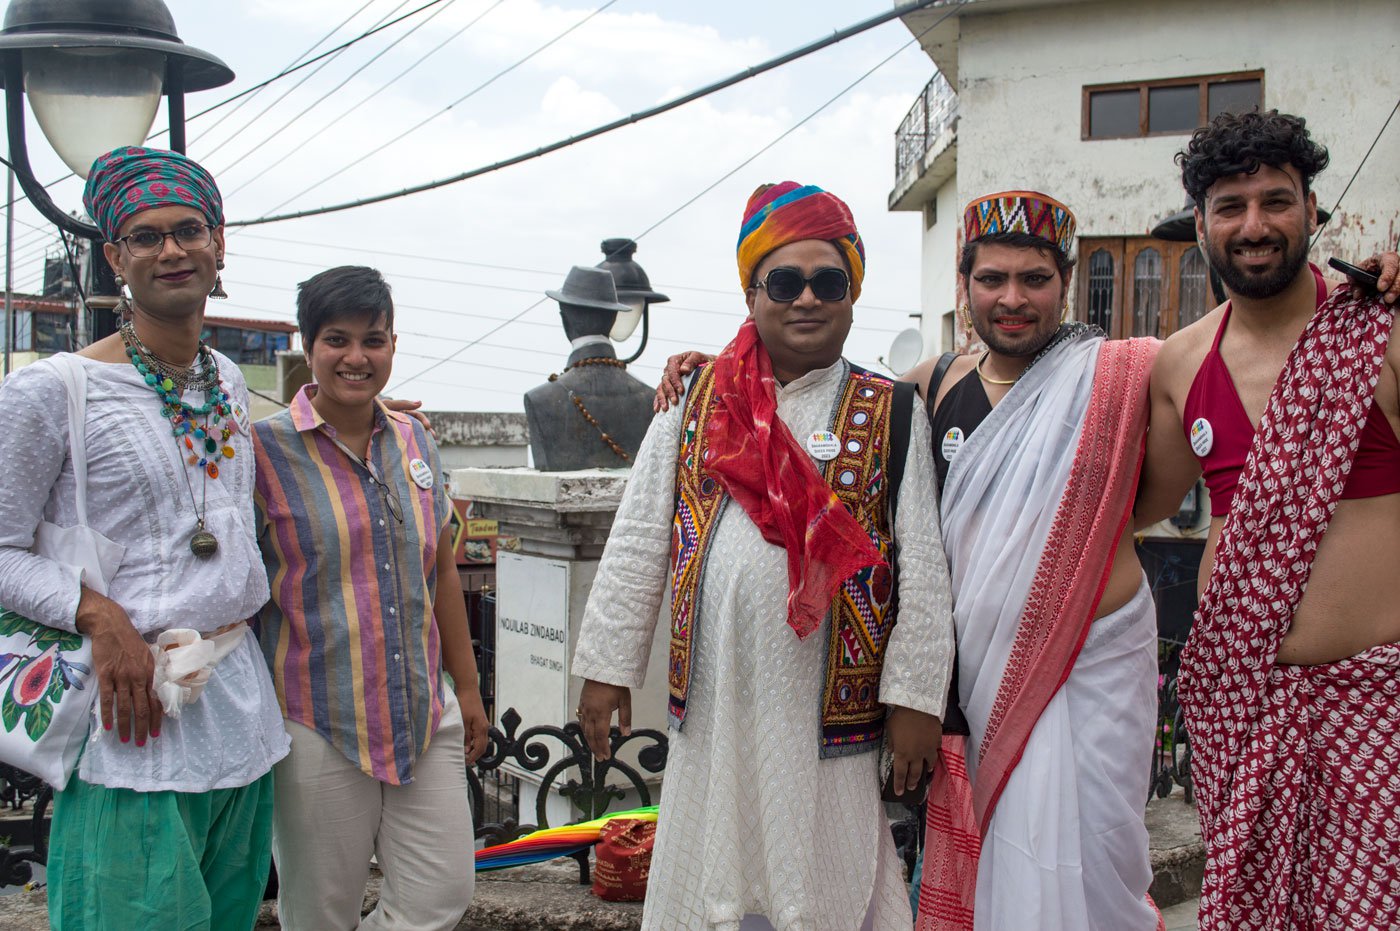 Anant Dayal, Sanya Jain, Manish Thapa, Don Hasar and Shashank (left to right) helped organise the Pride march